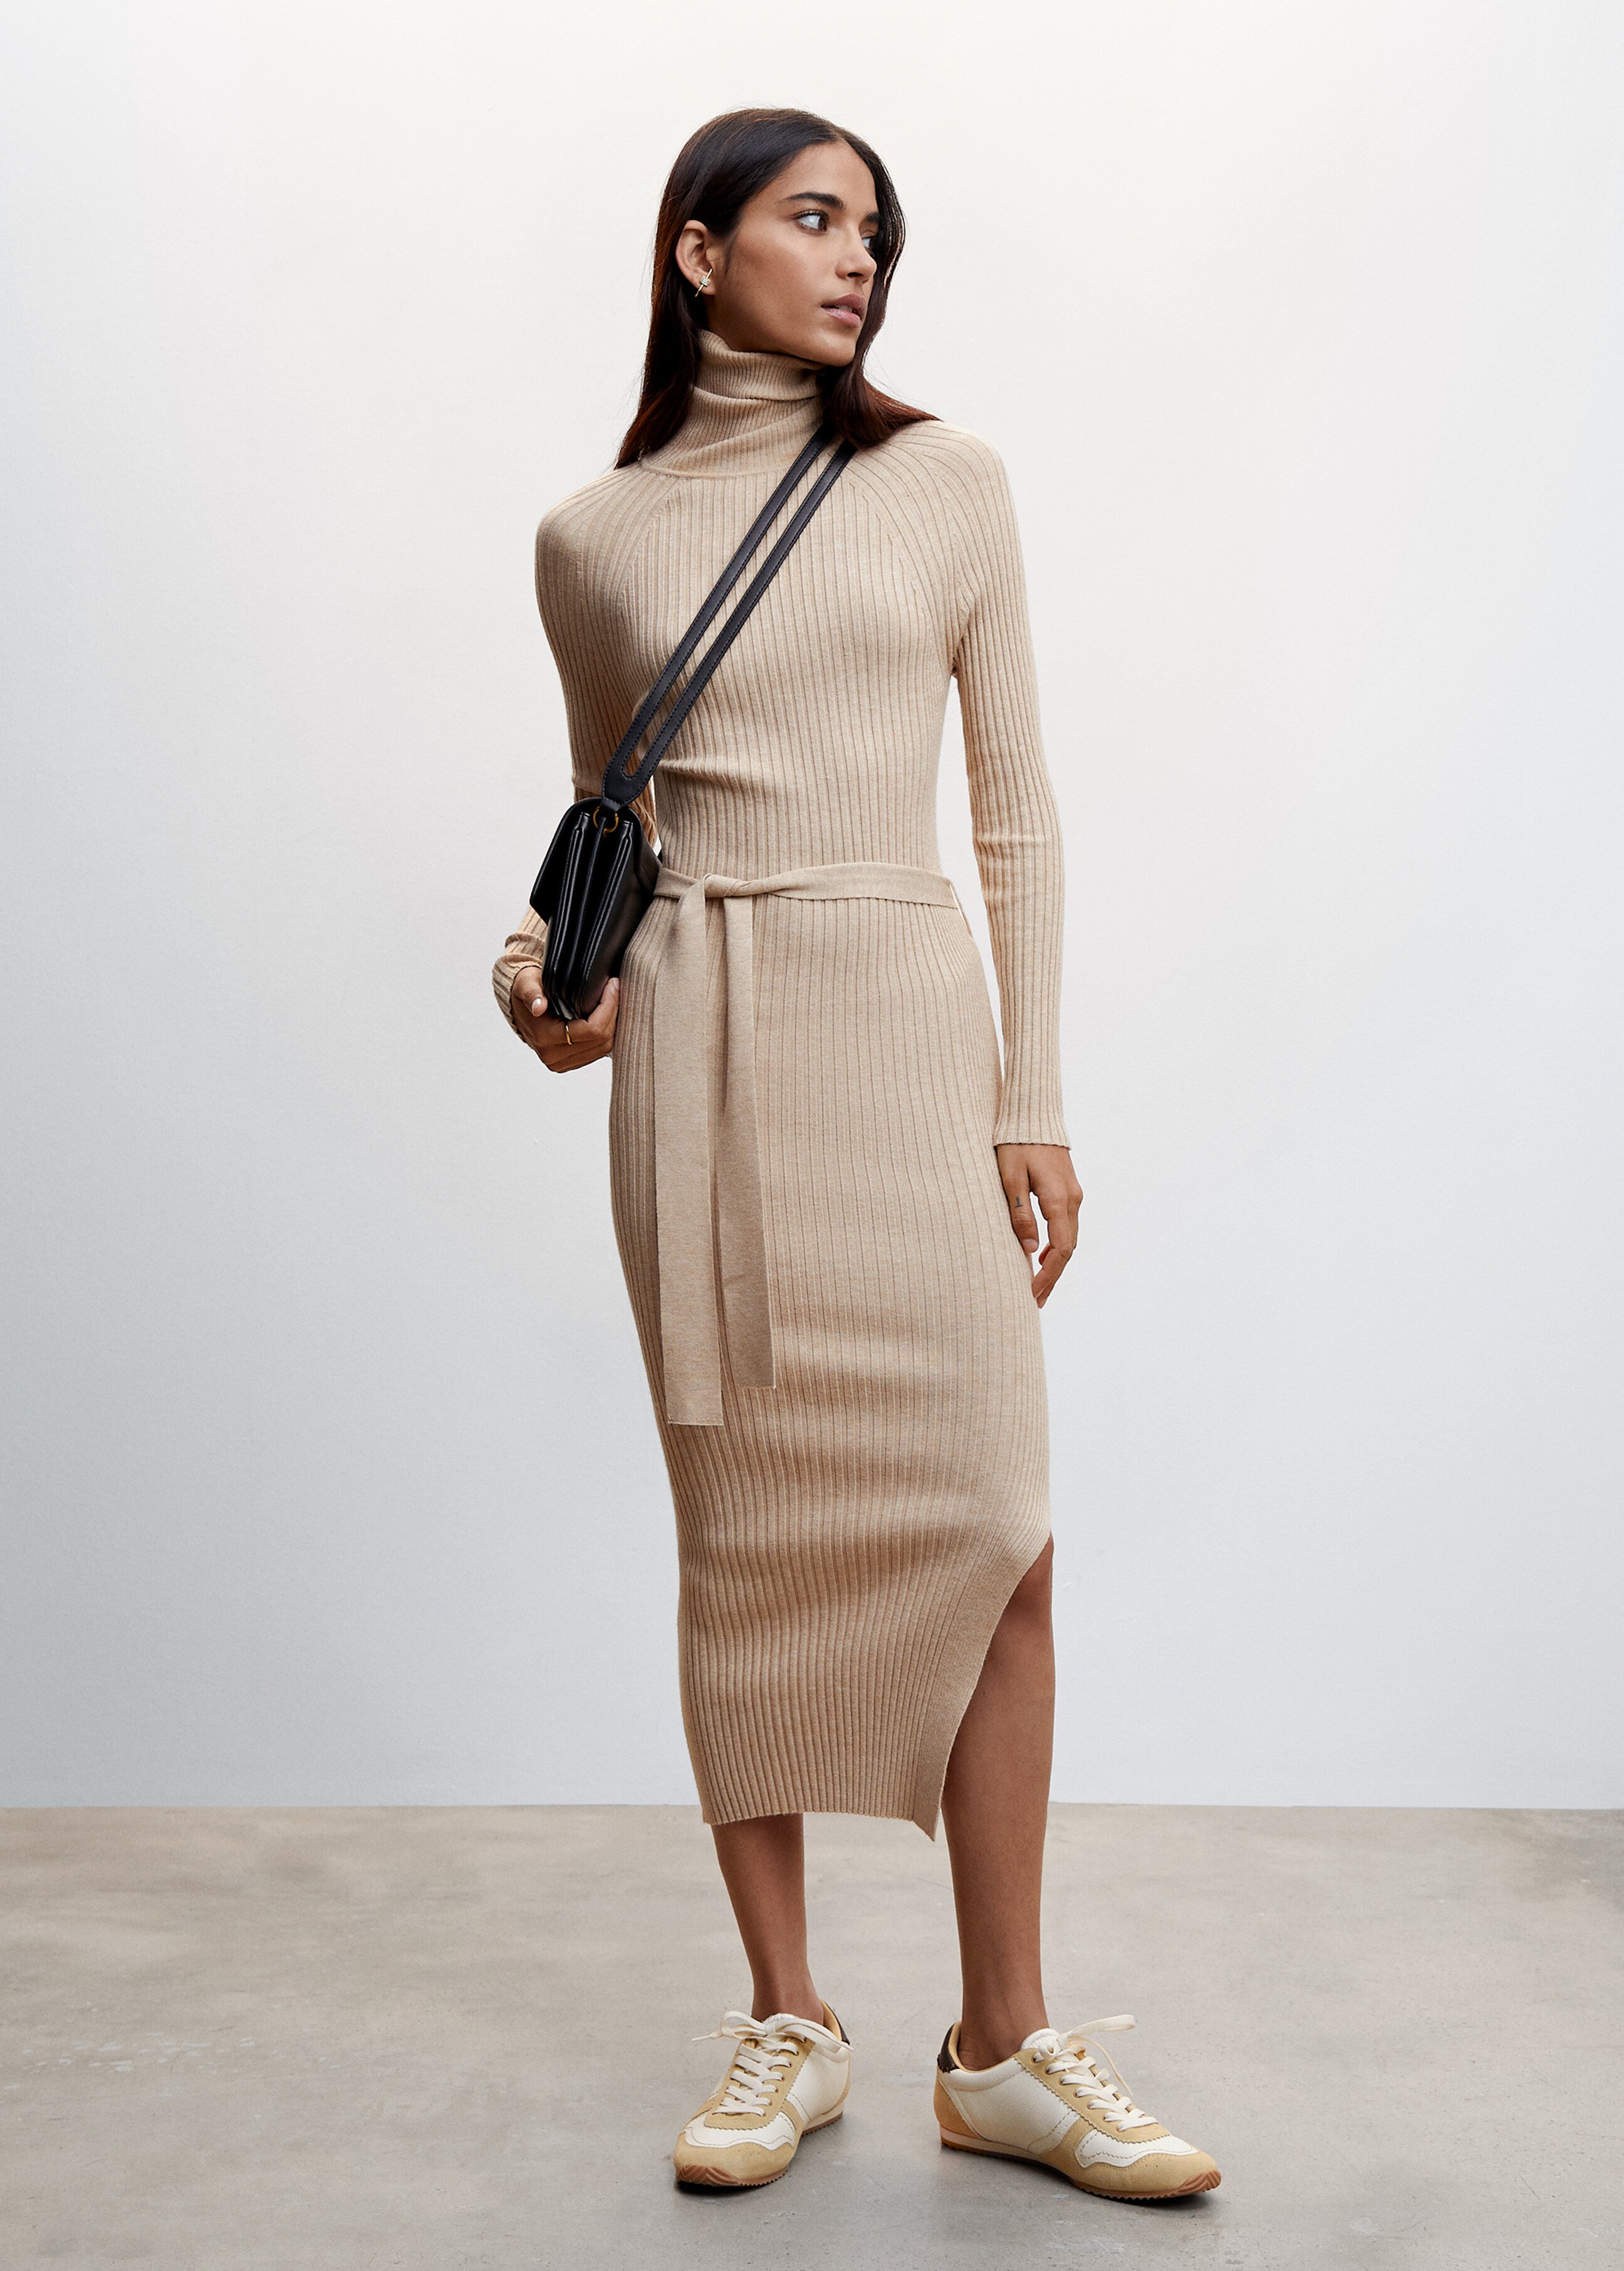 Ribbed dress with knot detail - General plane